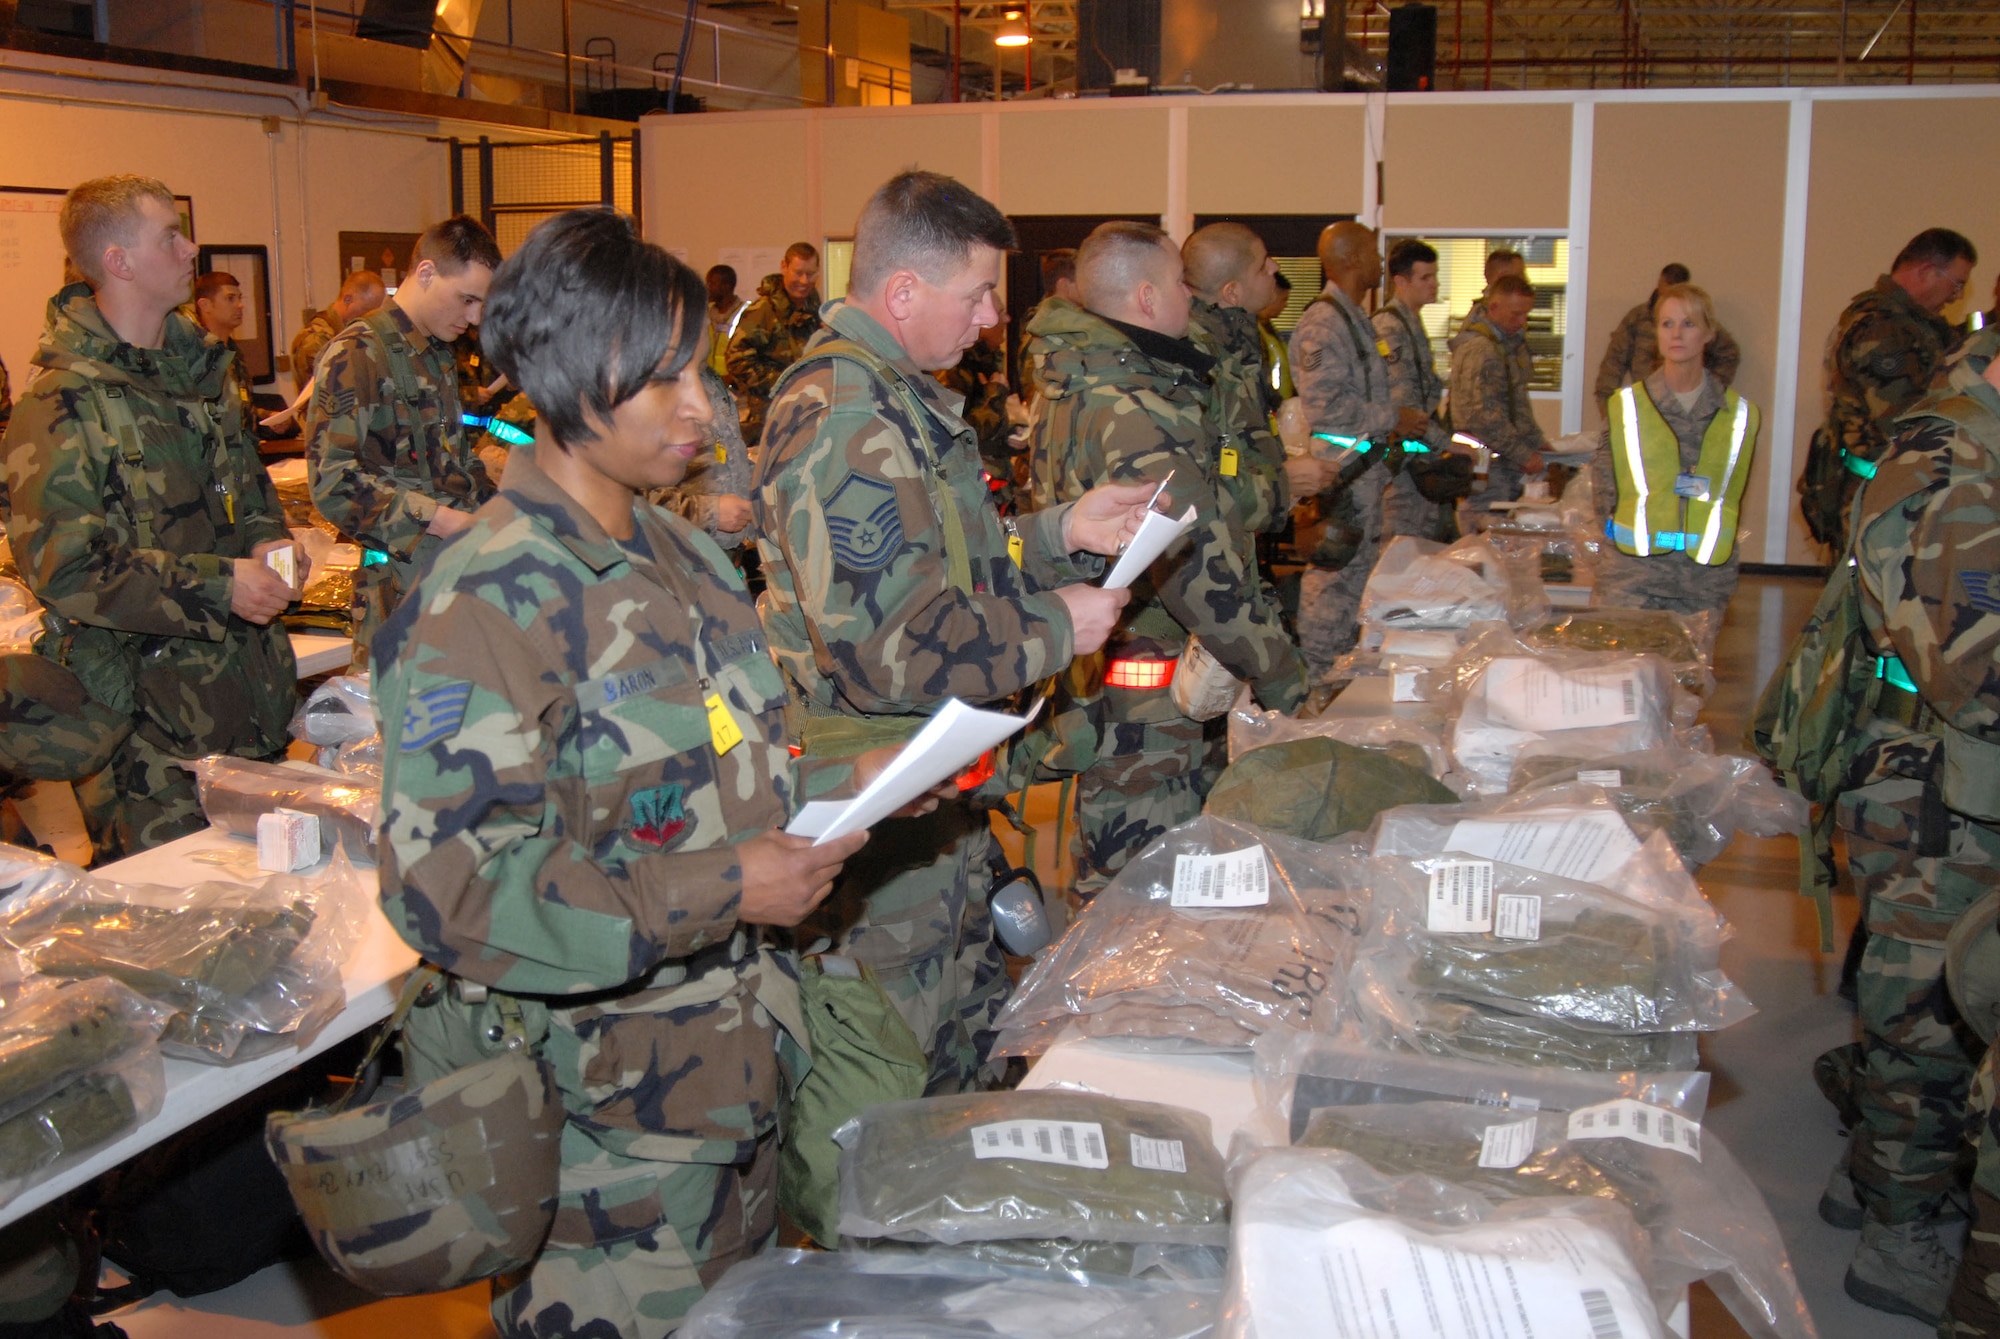 SSgt Terry Baron, SrA Gregory Swaisgood, MSgt Mark Caton, SSgt Troy Lippelt, SSgt Richard Martinez and others inventory their C-bags as SSgt Vicky Perreault observs during an Operational Readiness Inspection at the 140th Wing.  This is part of the processing that is required as  members prepare to deploy.  (Photo by SMSgt John Rohrer, 140th Wing Public Affairs)